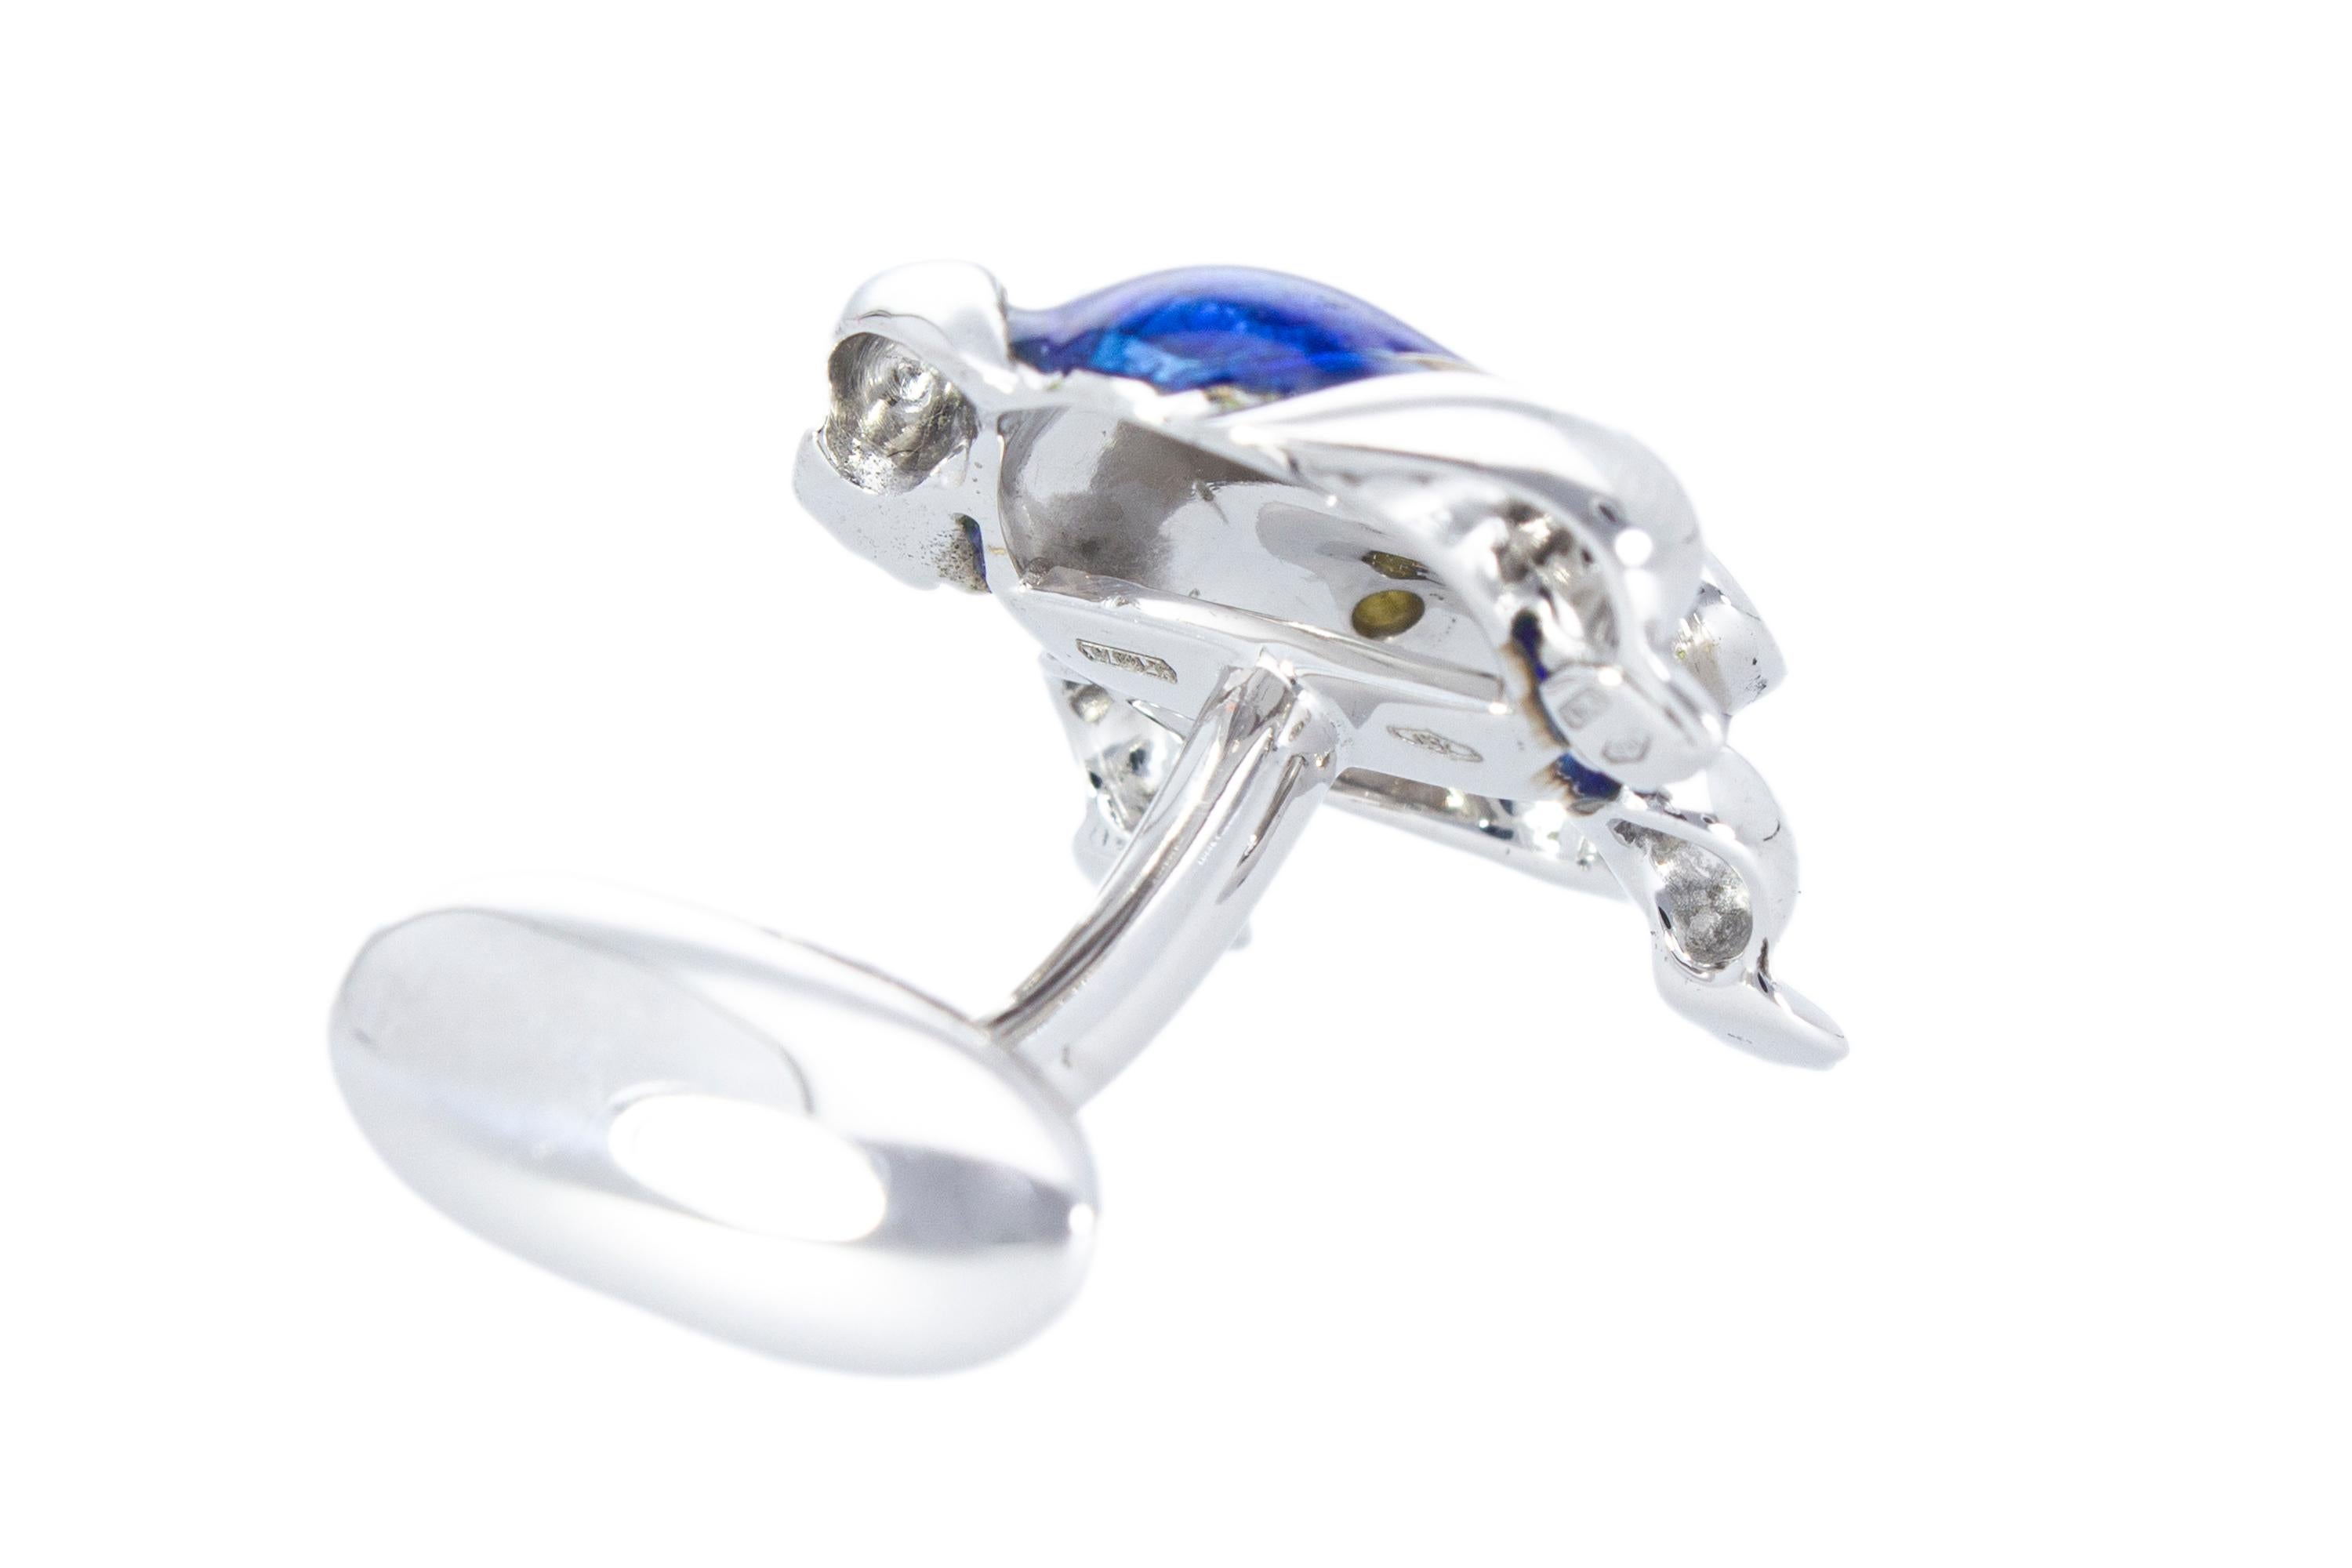 18 Kt White Gold with Blu Enamel Diamonds Frog Cufflinks Handcraft Made in Italy For Sale 10